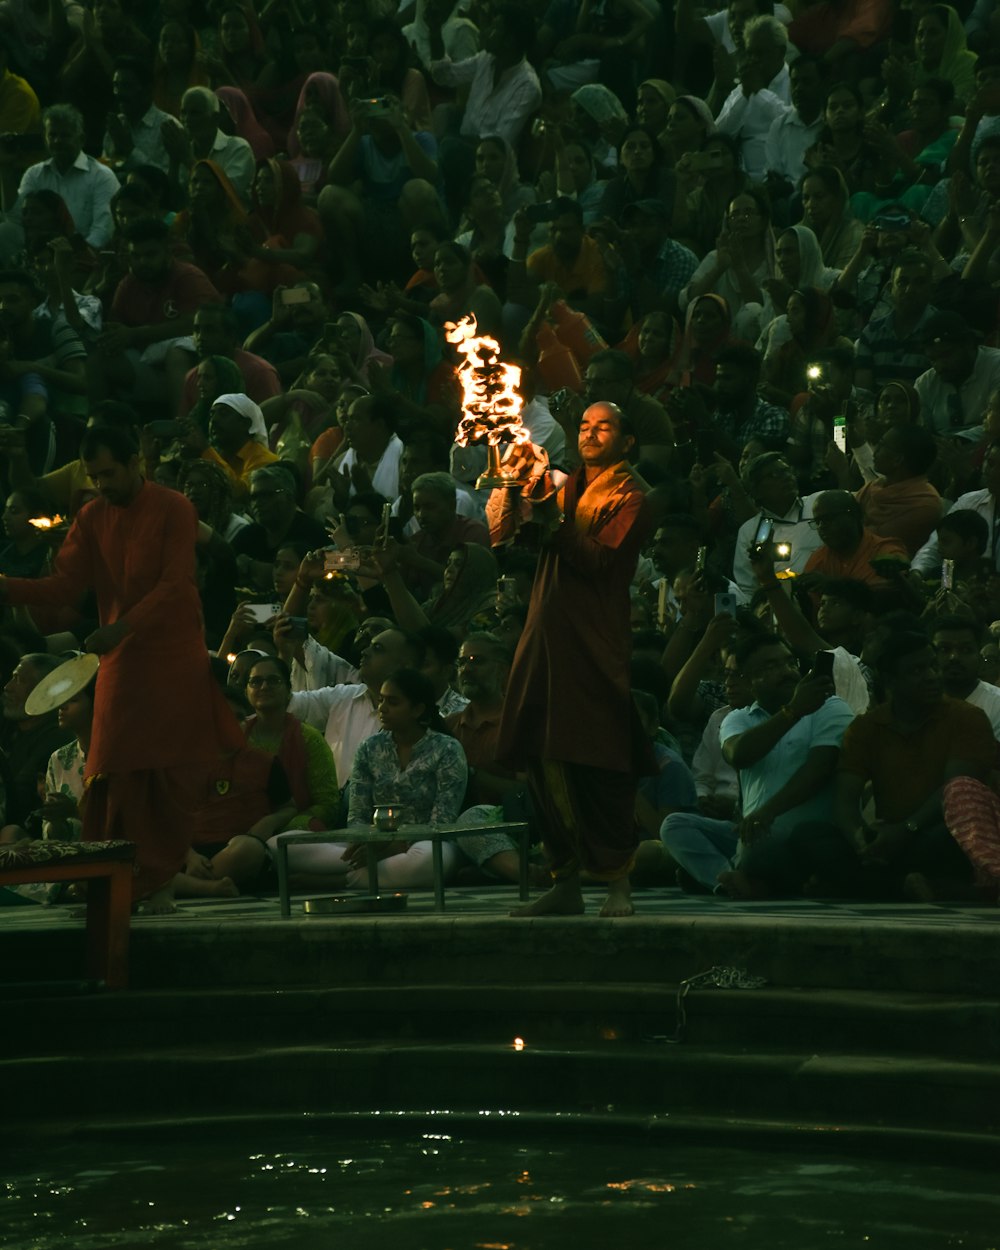 a crowd of people watching a man perform a fire show